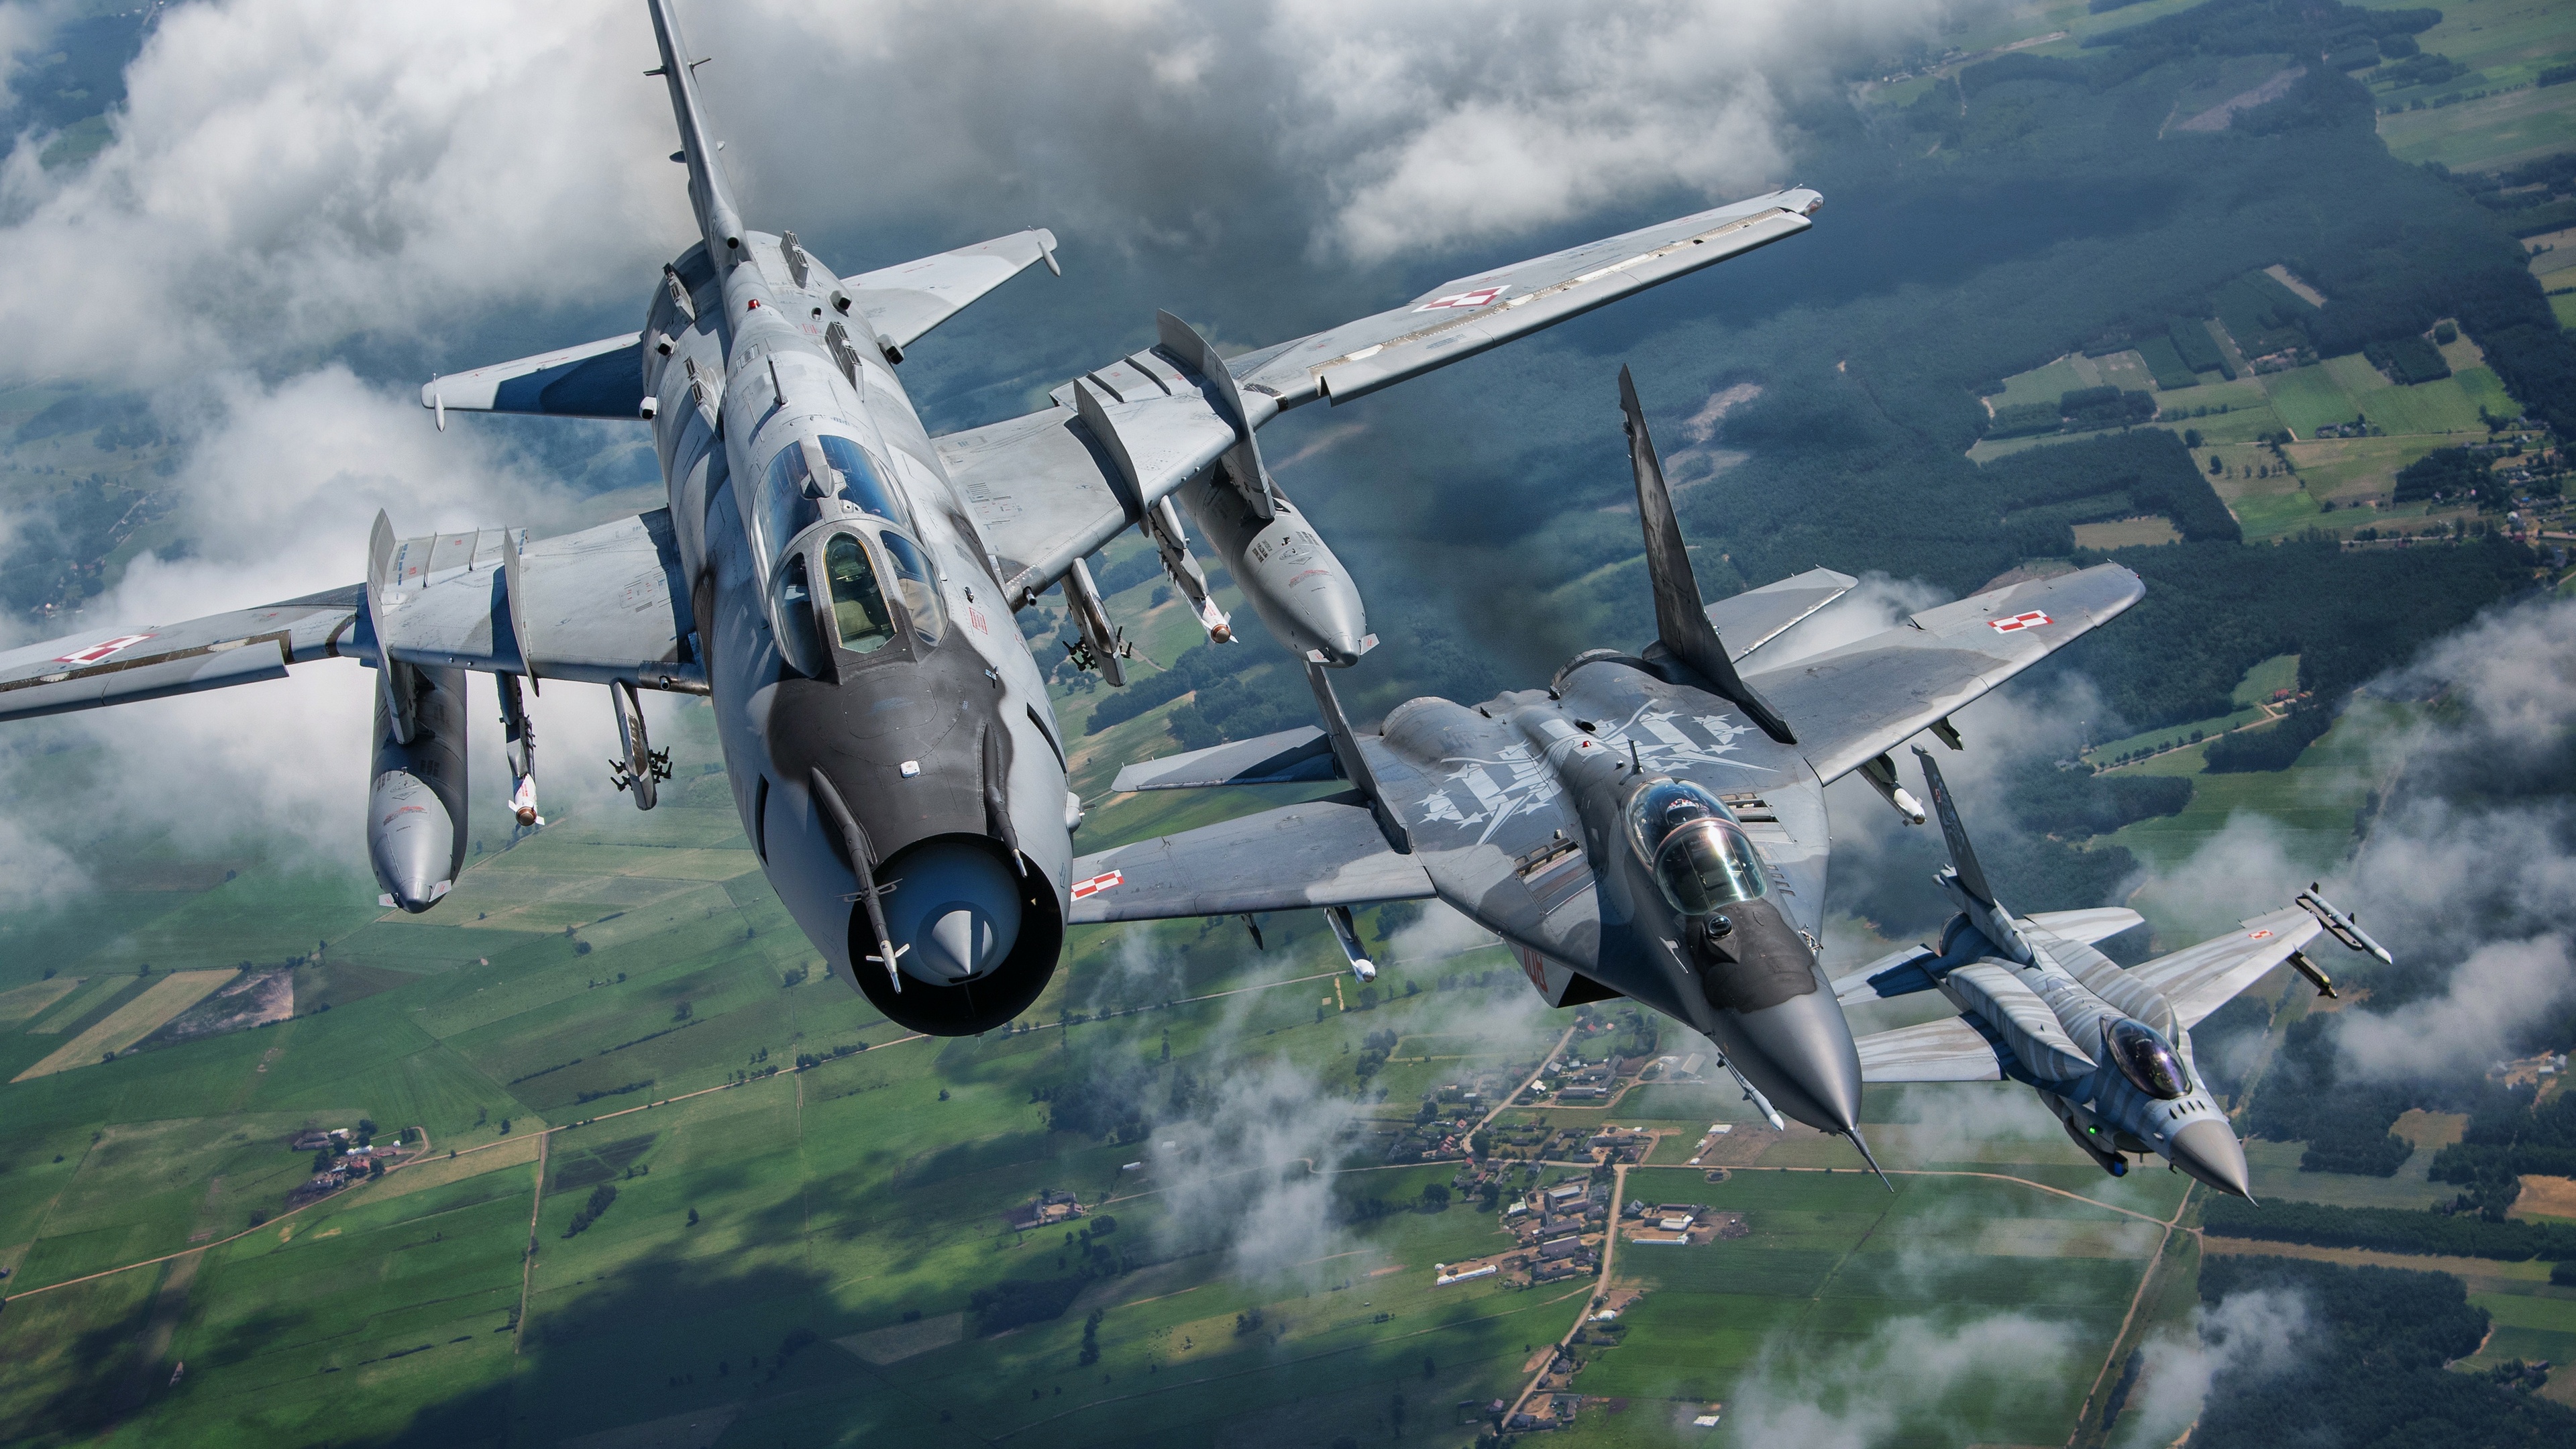 Wallpapers jet fighter military airplane on the desktop